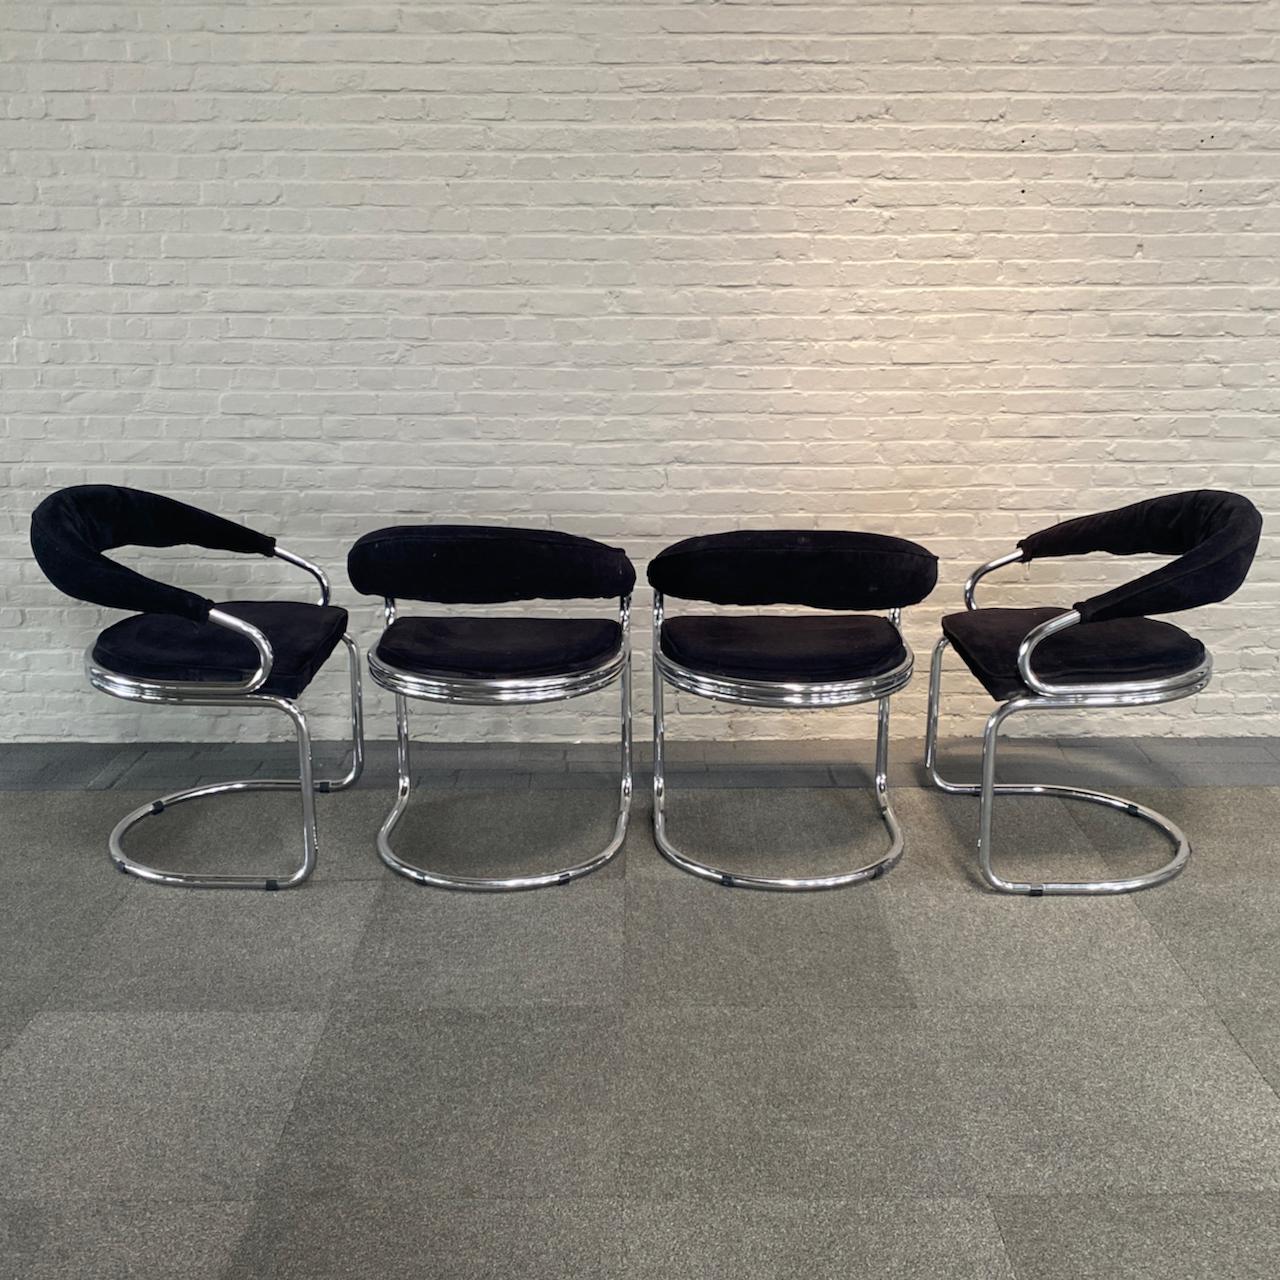 Set of 4 curved black velvet chairs with a chromed tubular frame.
These chairs are in very good vintage condition.
The black velvet upholstery is to our knowledge original.
Even the chrome plating is amazing; considering it is almost 50 years